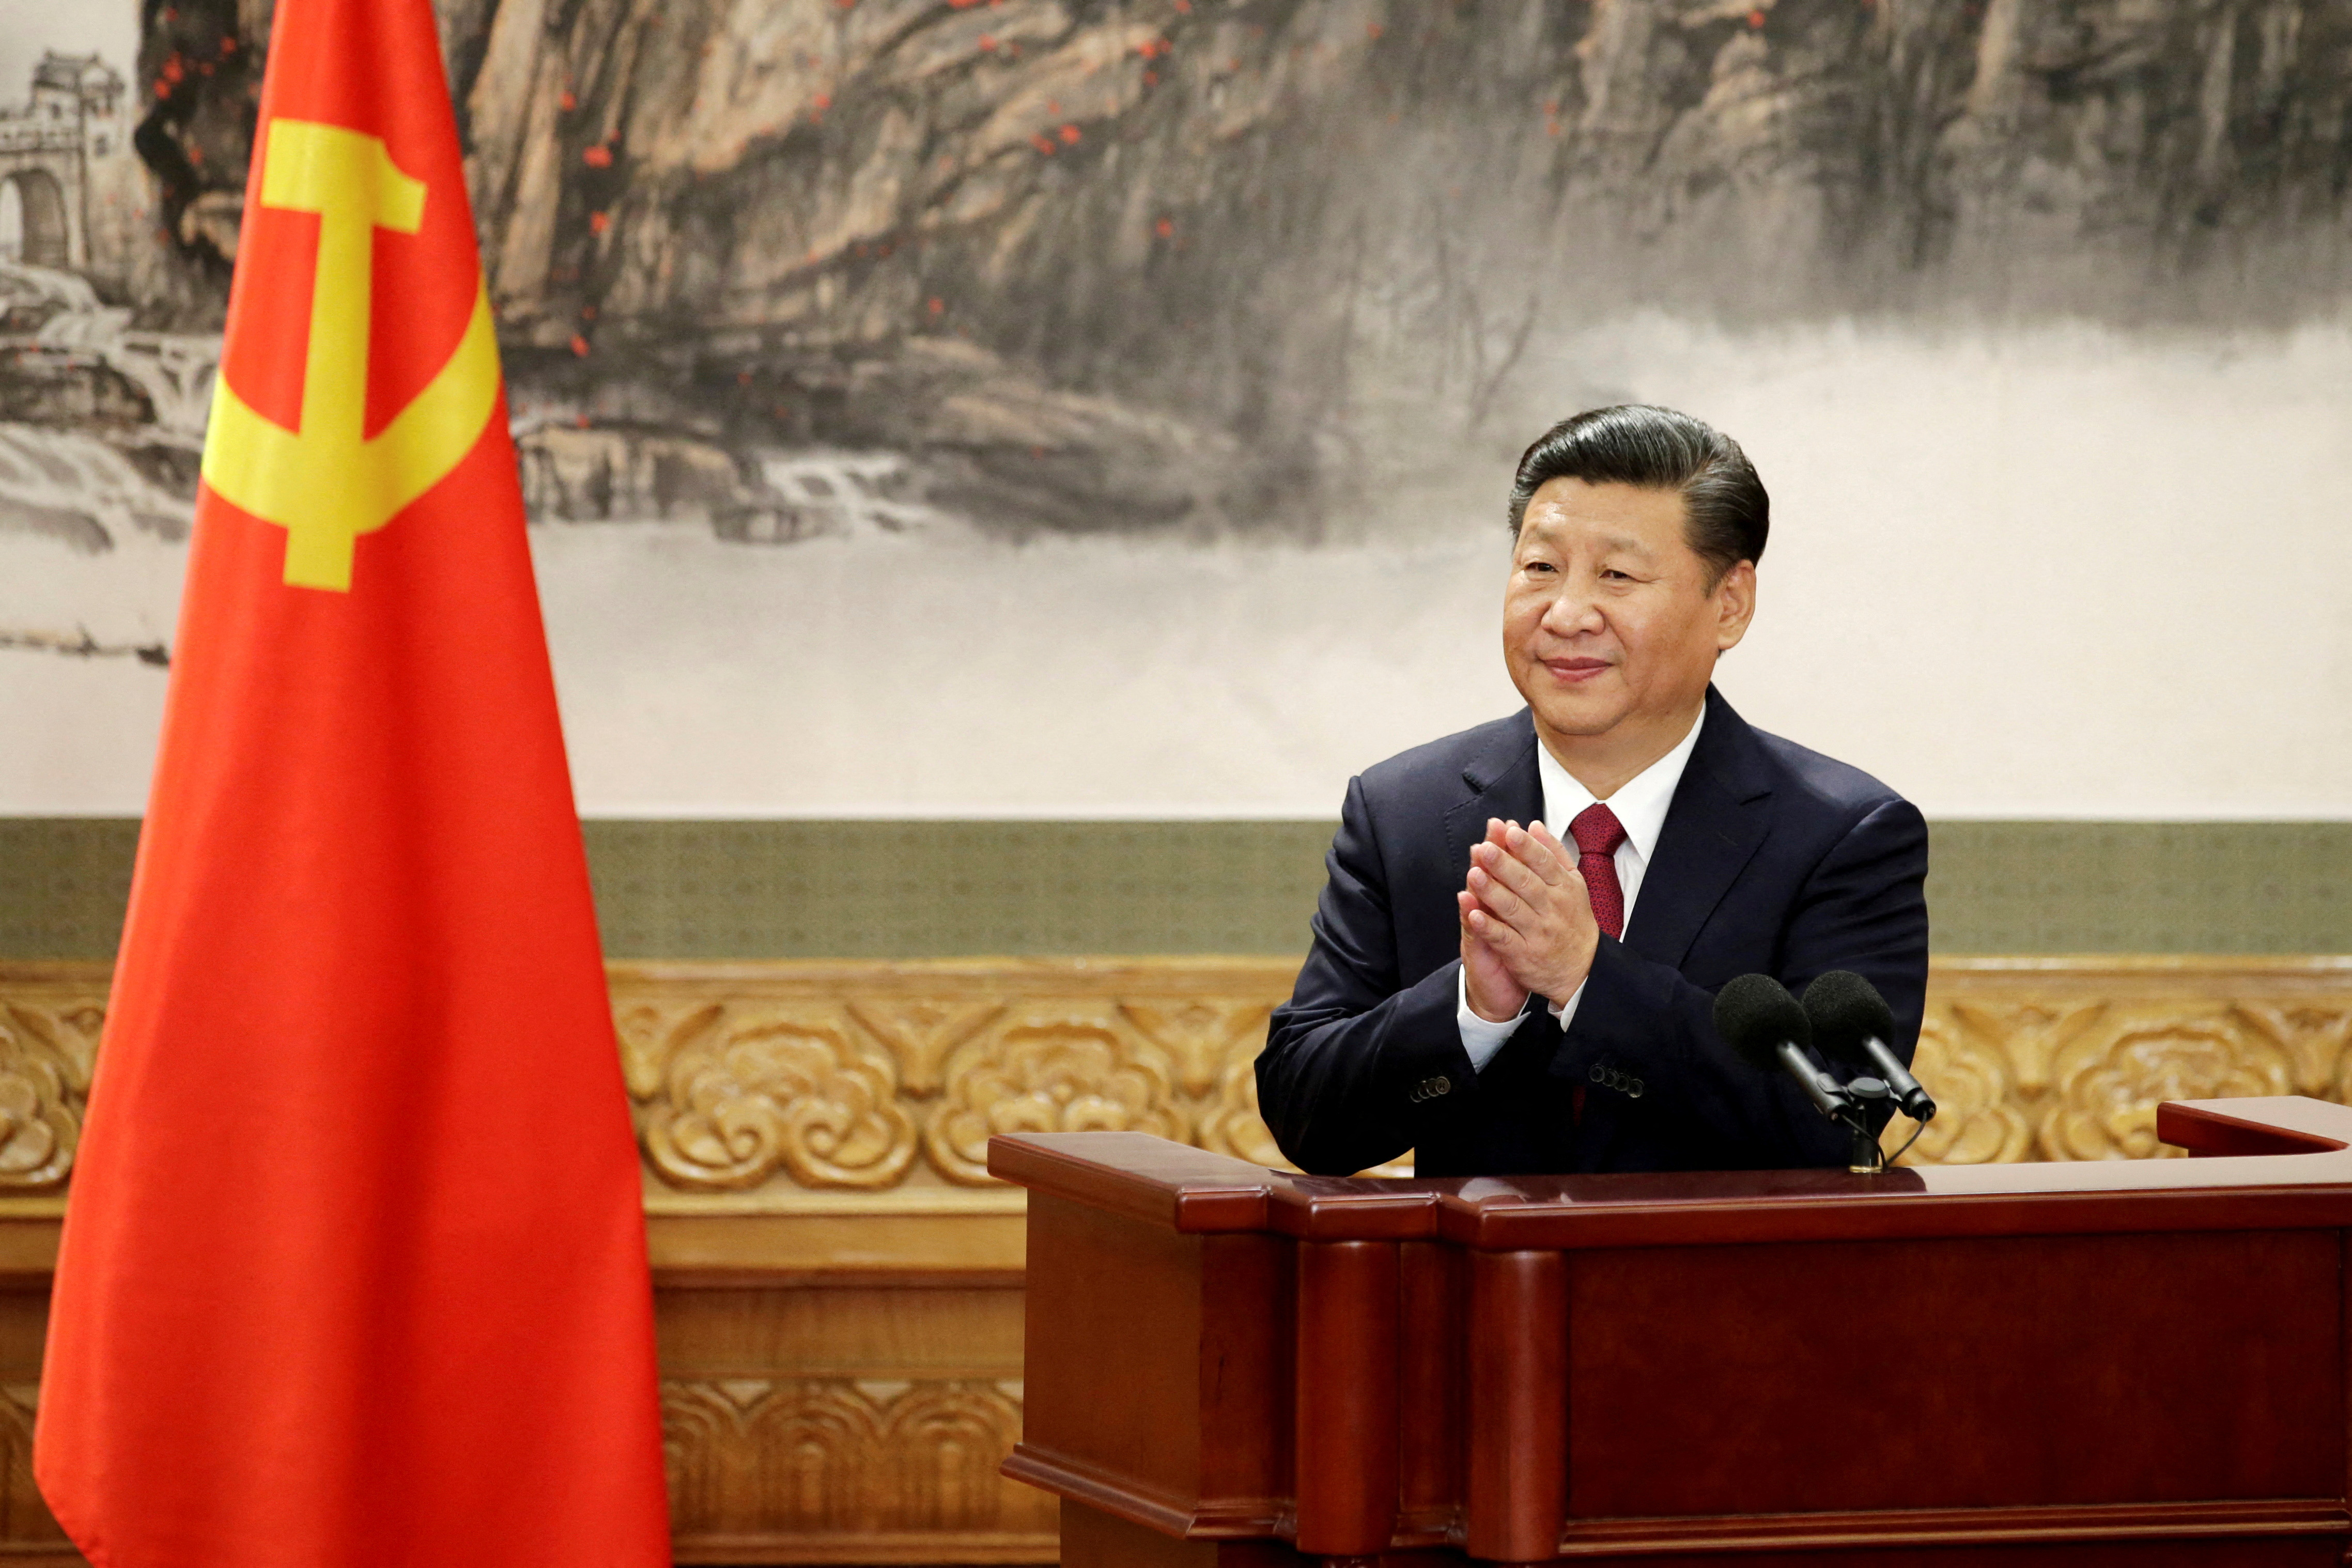 Chinese President Xi Jinping applauds after his speech as new members of China's Politburo Standing Committee meet with the press at the Great Hall of the People in Beijing, China (REUTERS/Jason Lee/File)